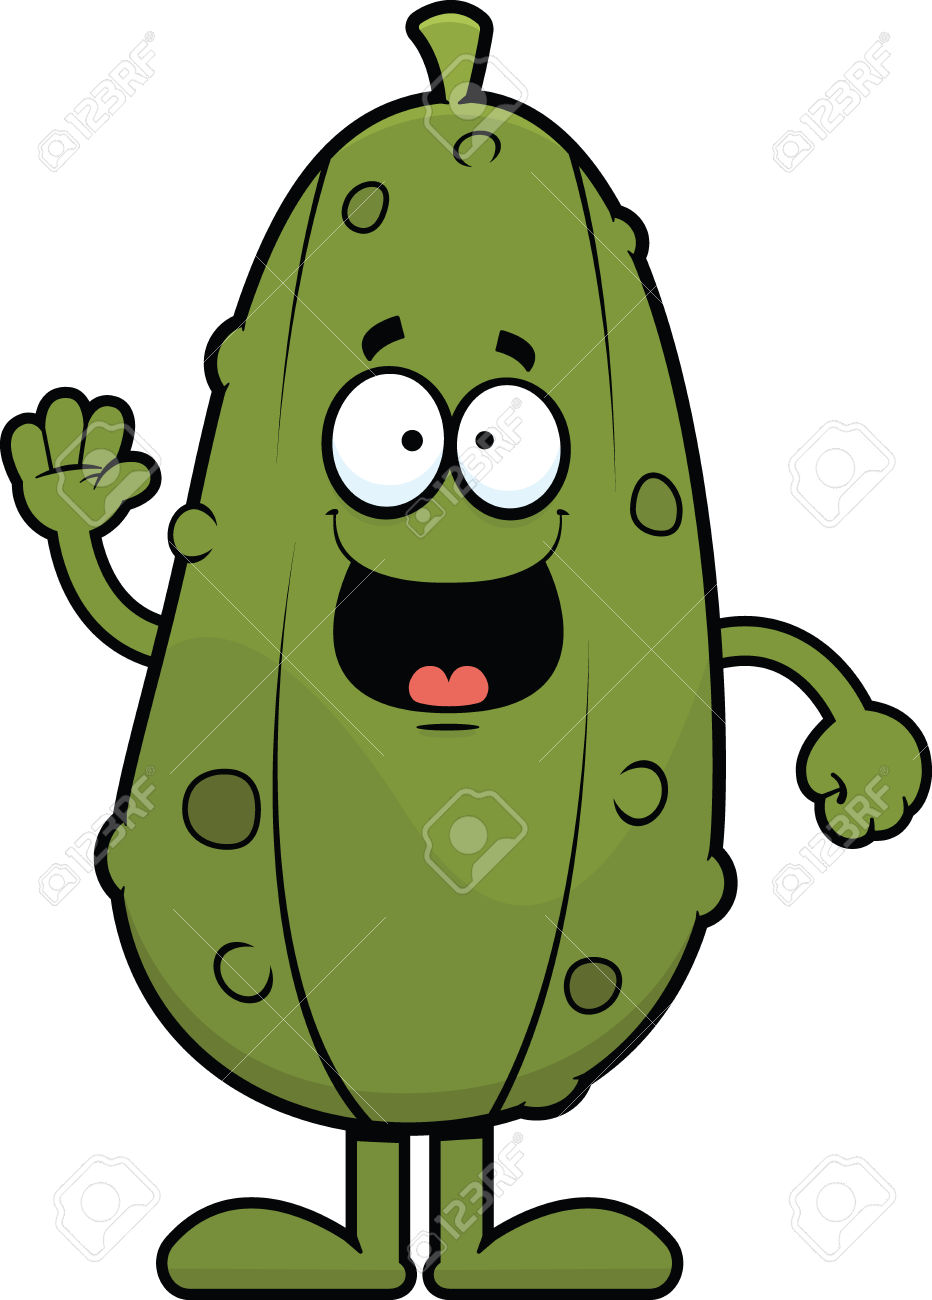 pickles clipart two